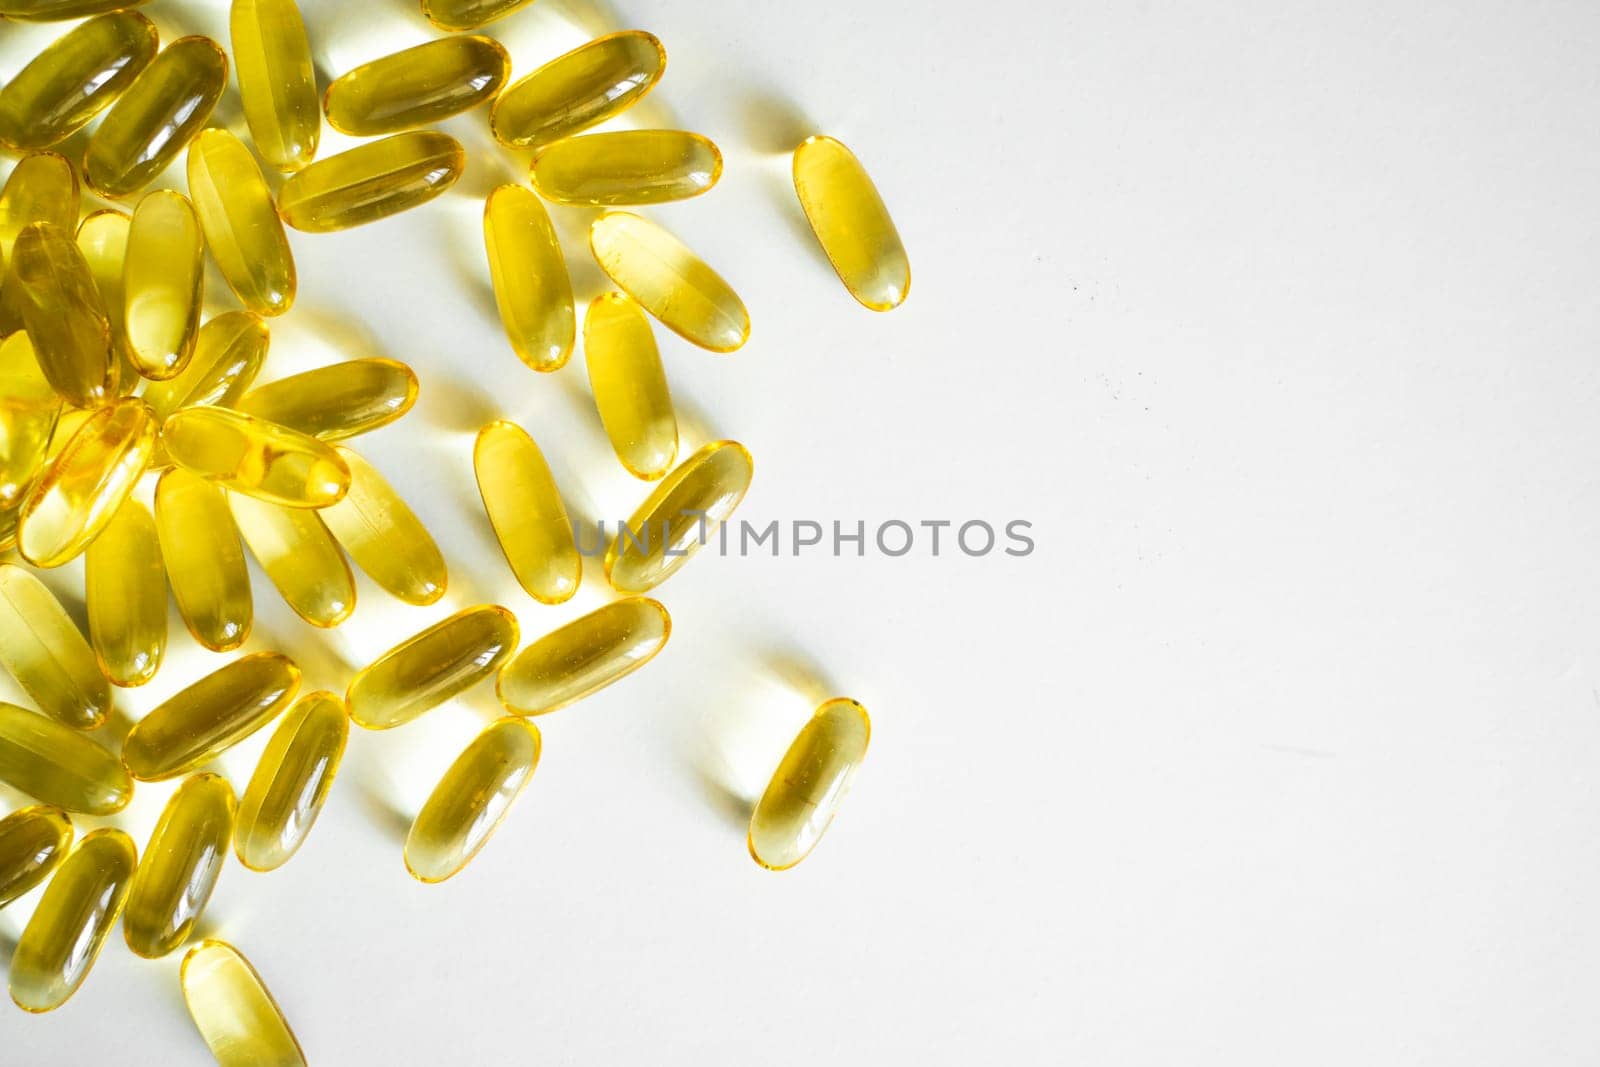 Fish oil capsules, omega 3, on white surface. Oil filled capsules, softgel of food supplements